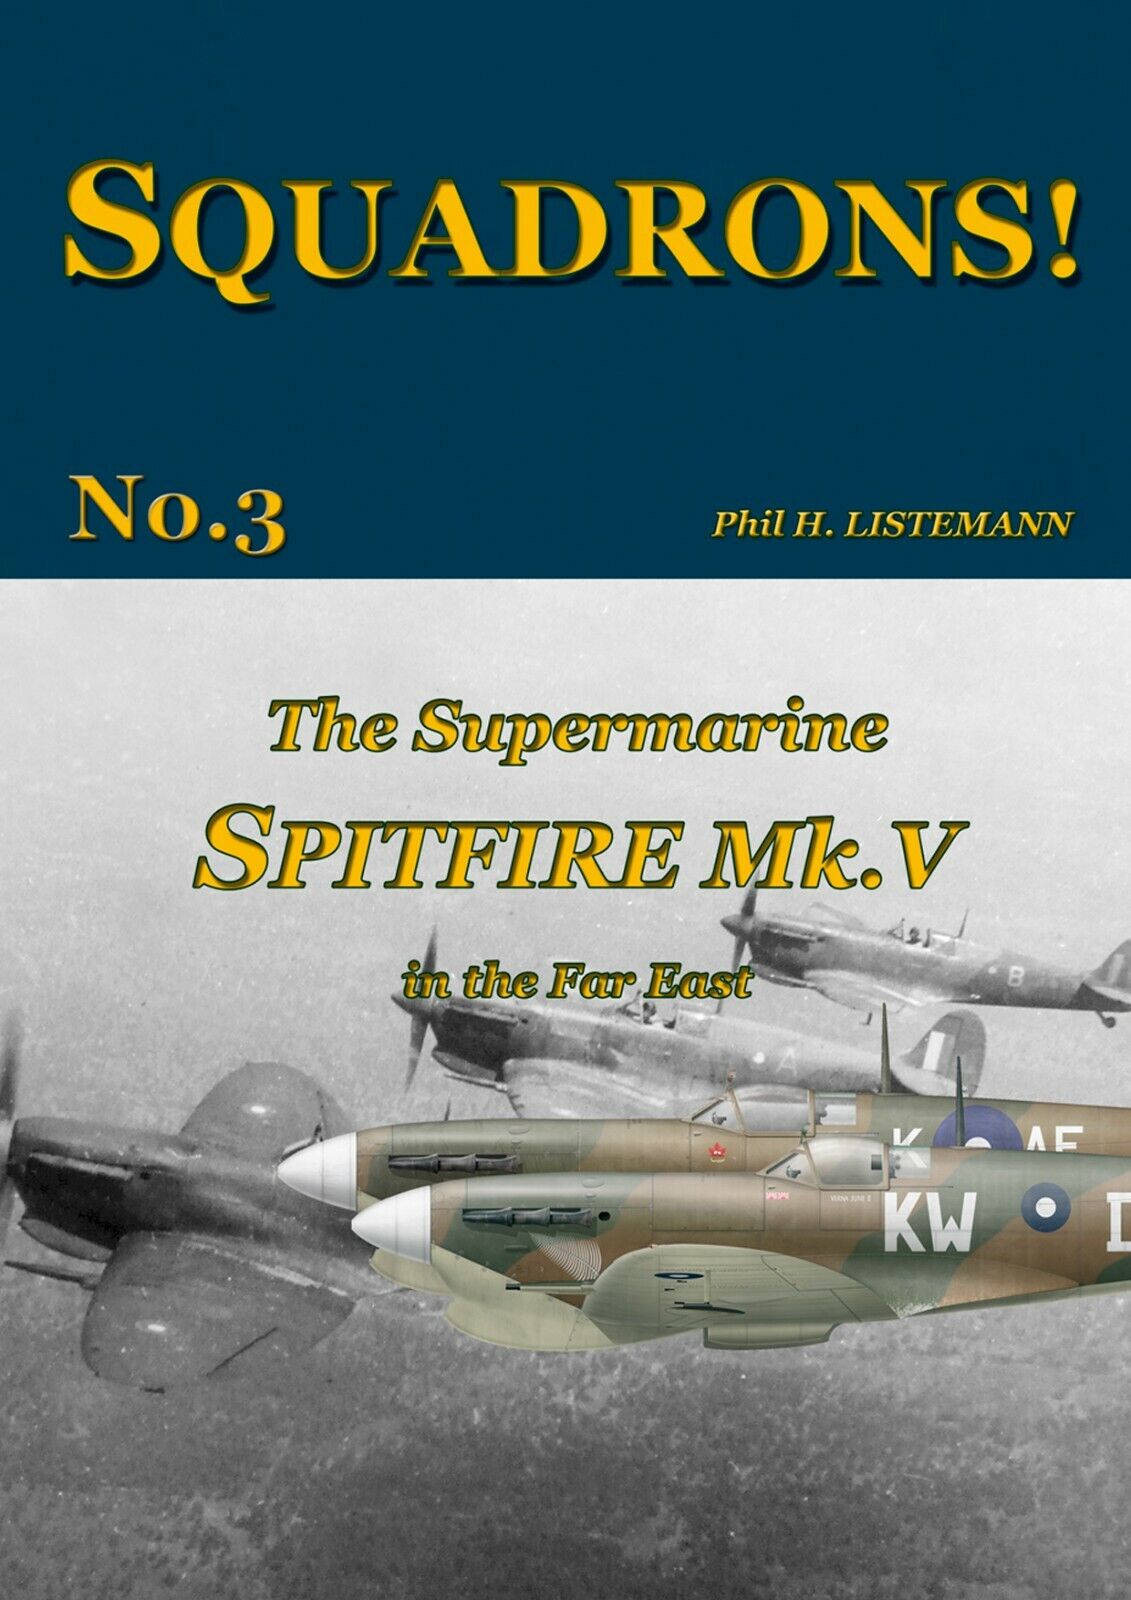 SQUADRONS No. 3 - The Far East (Revised)